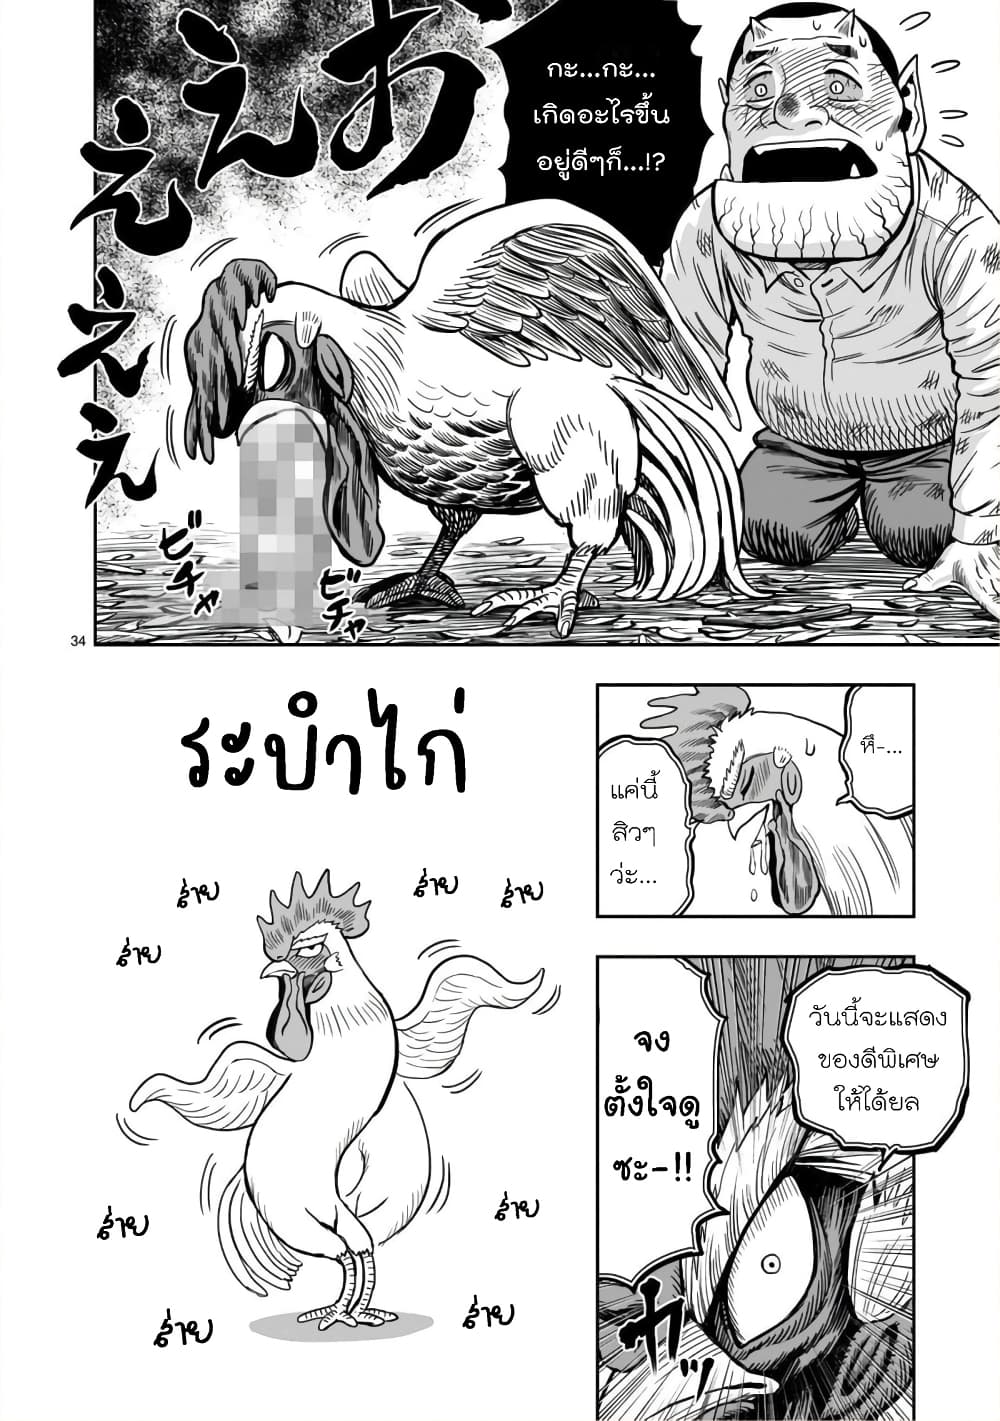 Rooster Fighter 12 (33)